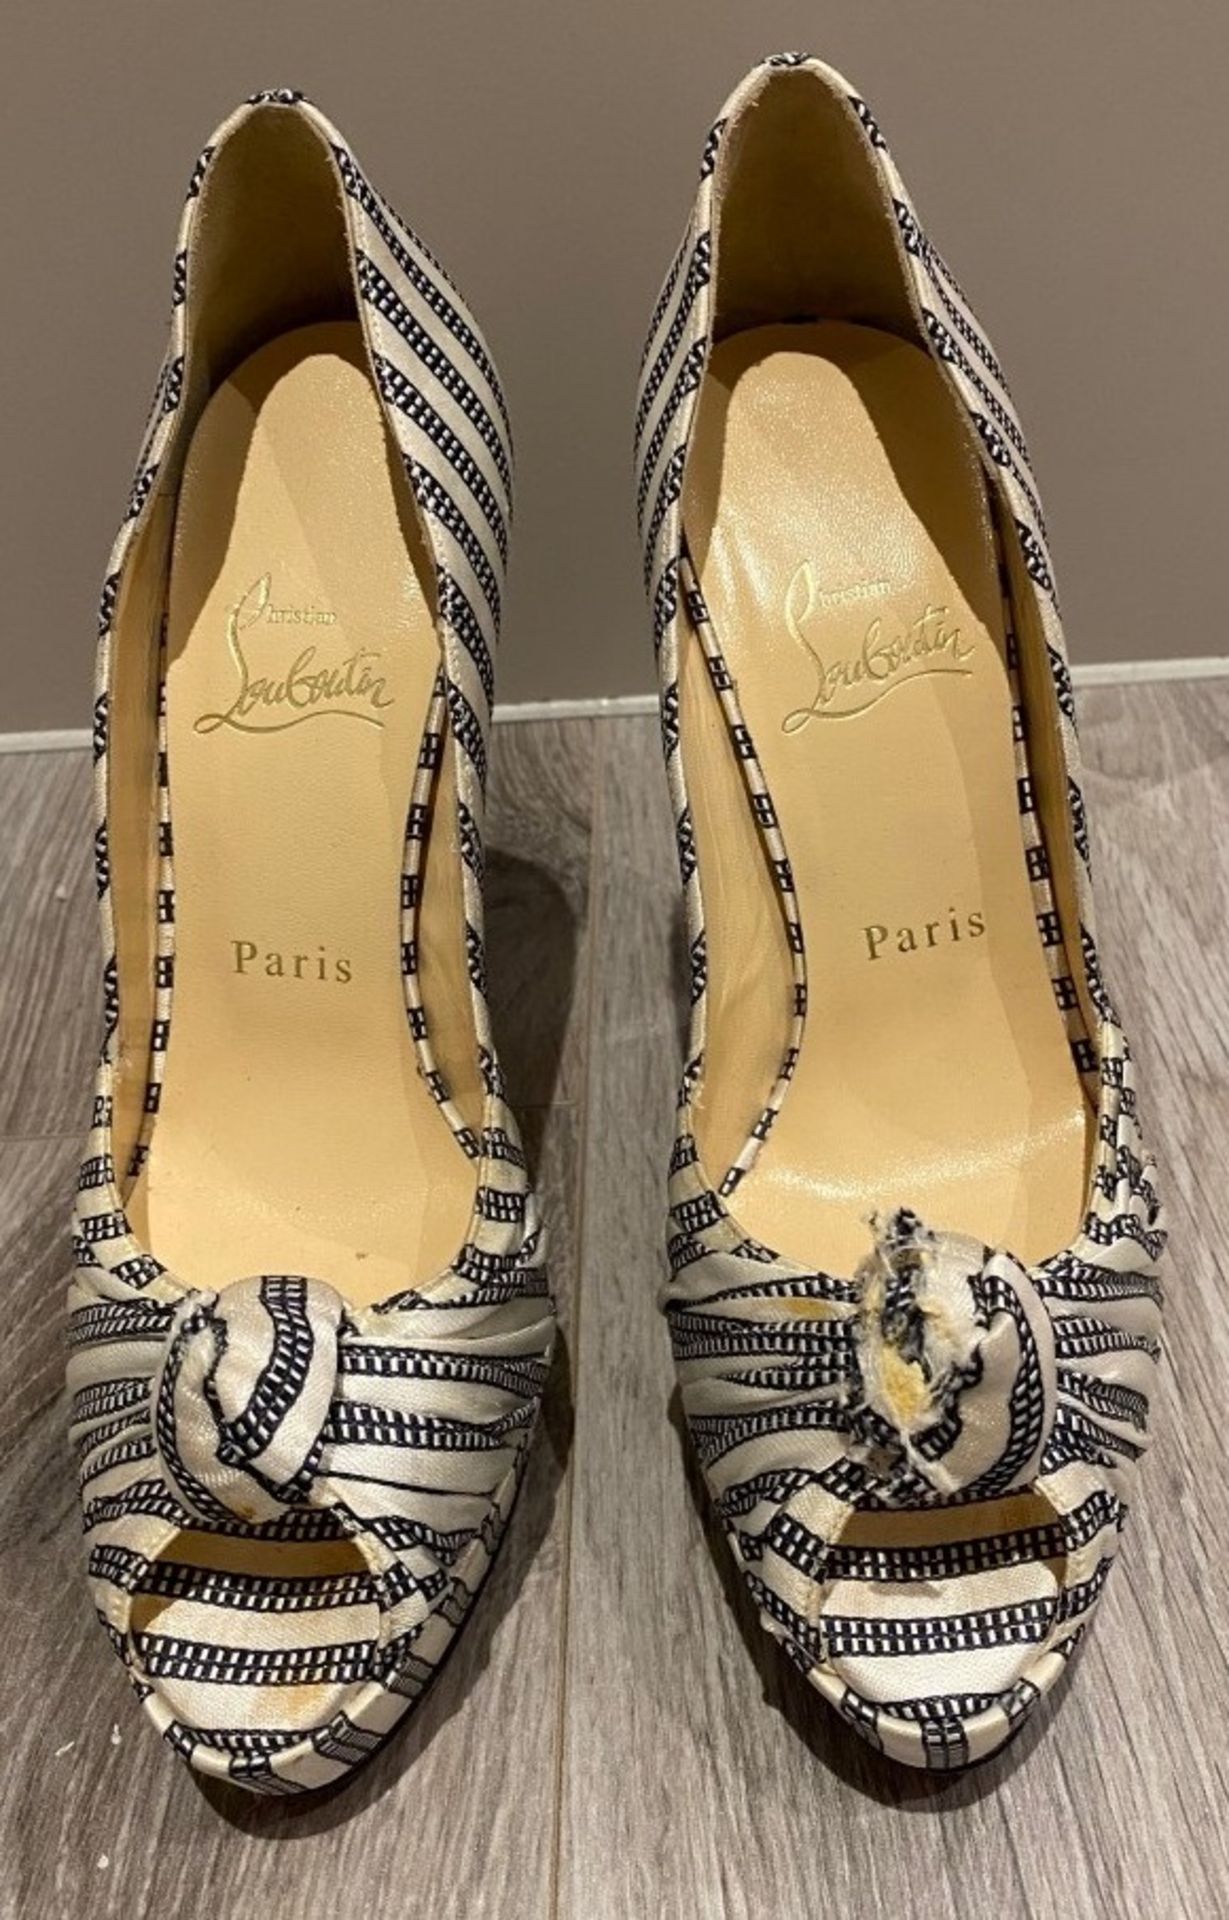 1 x Pair Of Genuine Christain Louboutin High Heel Shoes In Stripe - Size: 37 - Preowned in Very Worn - Image 3 of 5